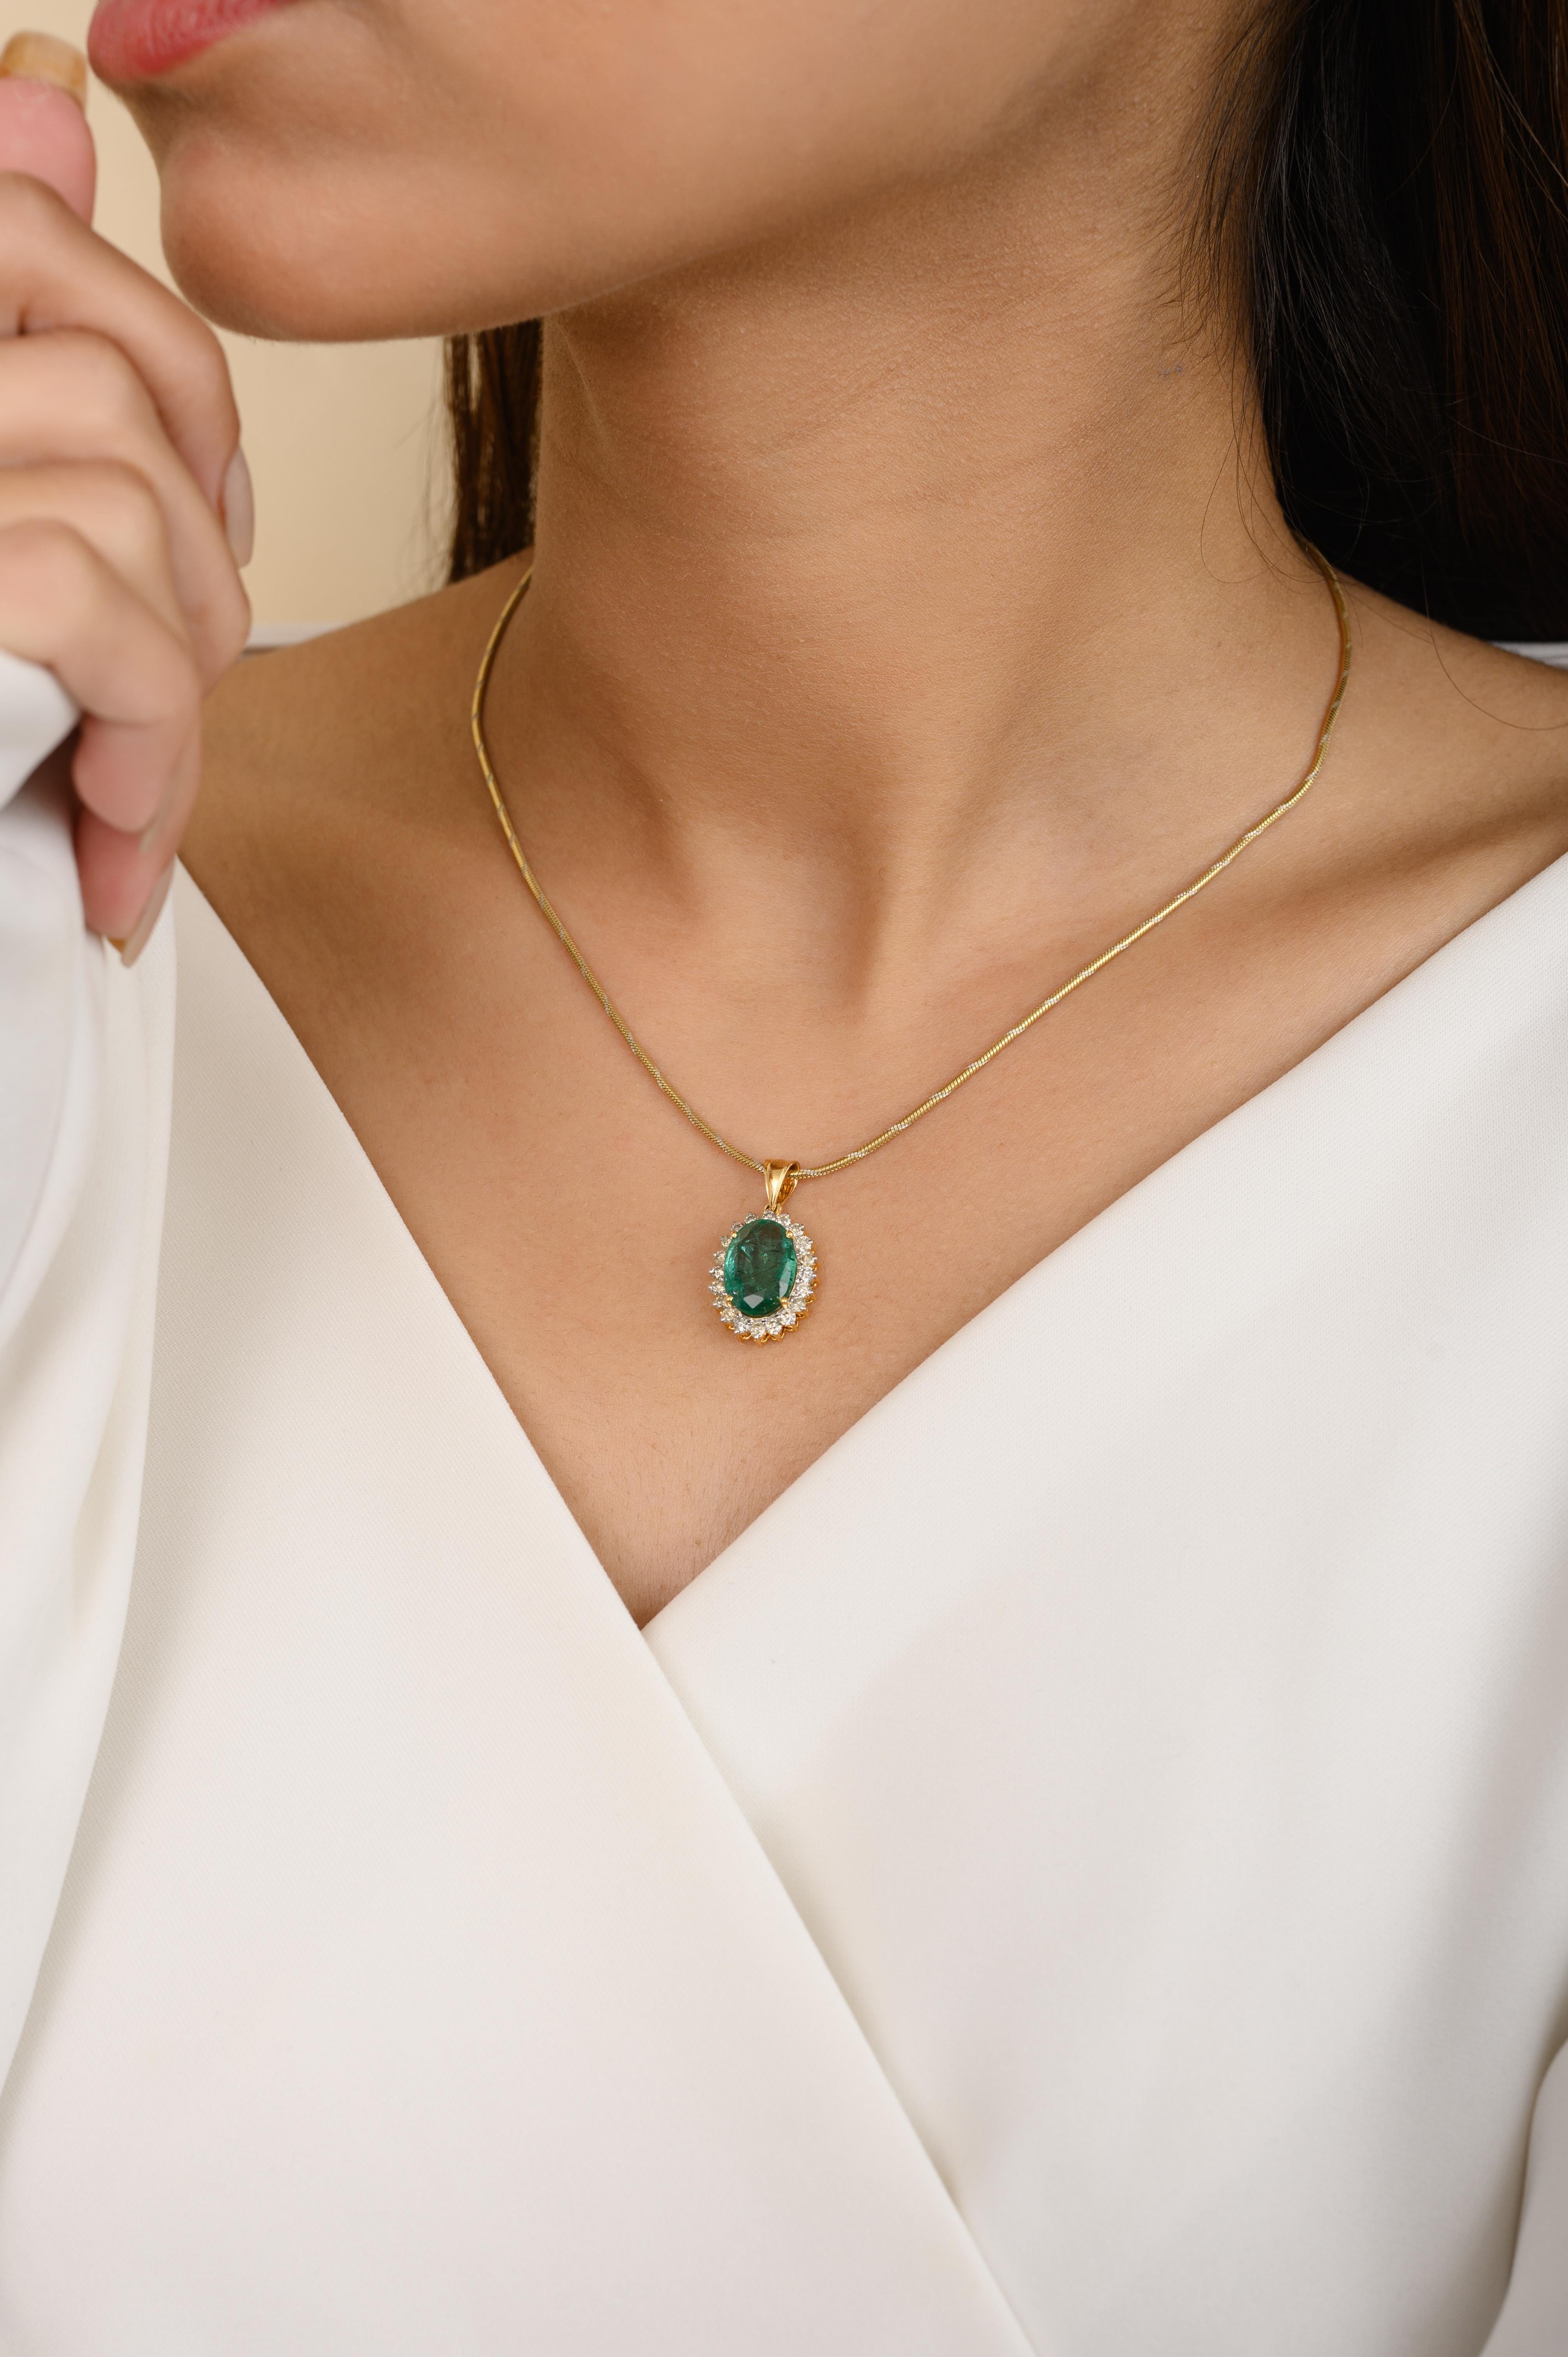 4.2 Carat Oval Emerald Diamond Halo Pendant in 14K Gold studded with oval cut emerald and halo of diamonds. This stunning piece of jewelry instantly elevates a casual look or dressy outfit. 
Emerald enhances the intellectual capacity of the